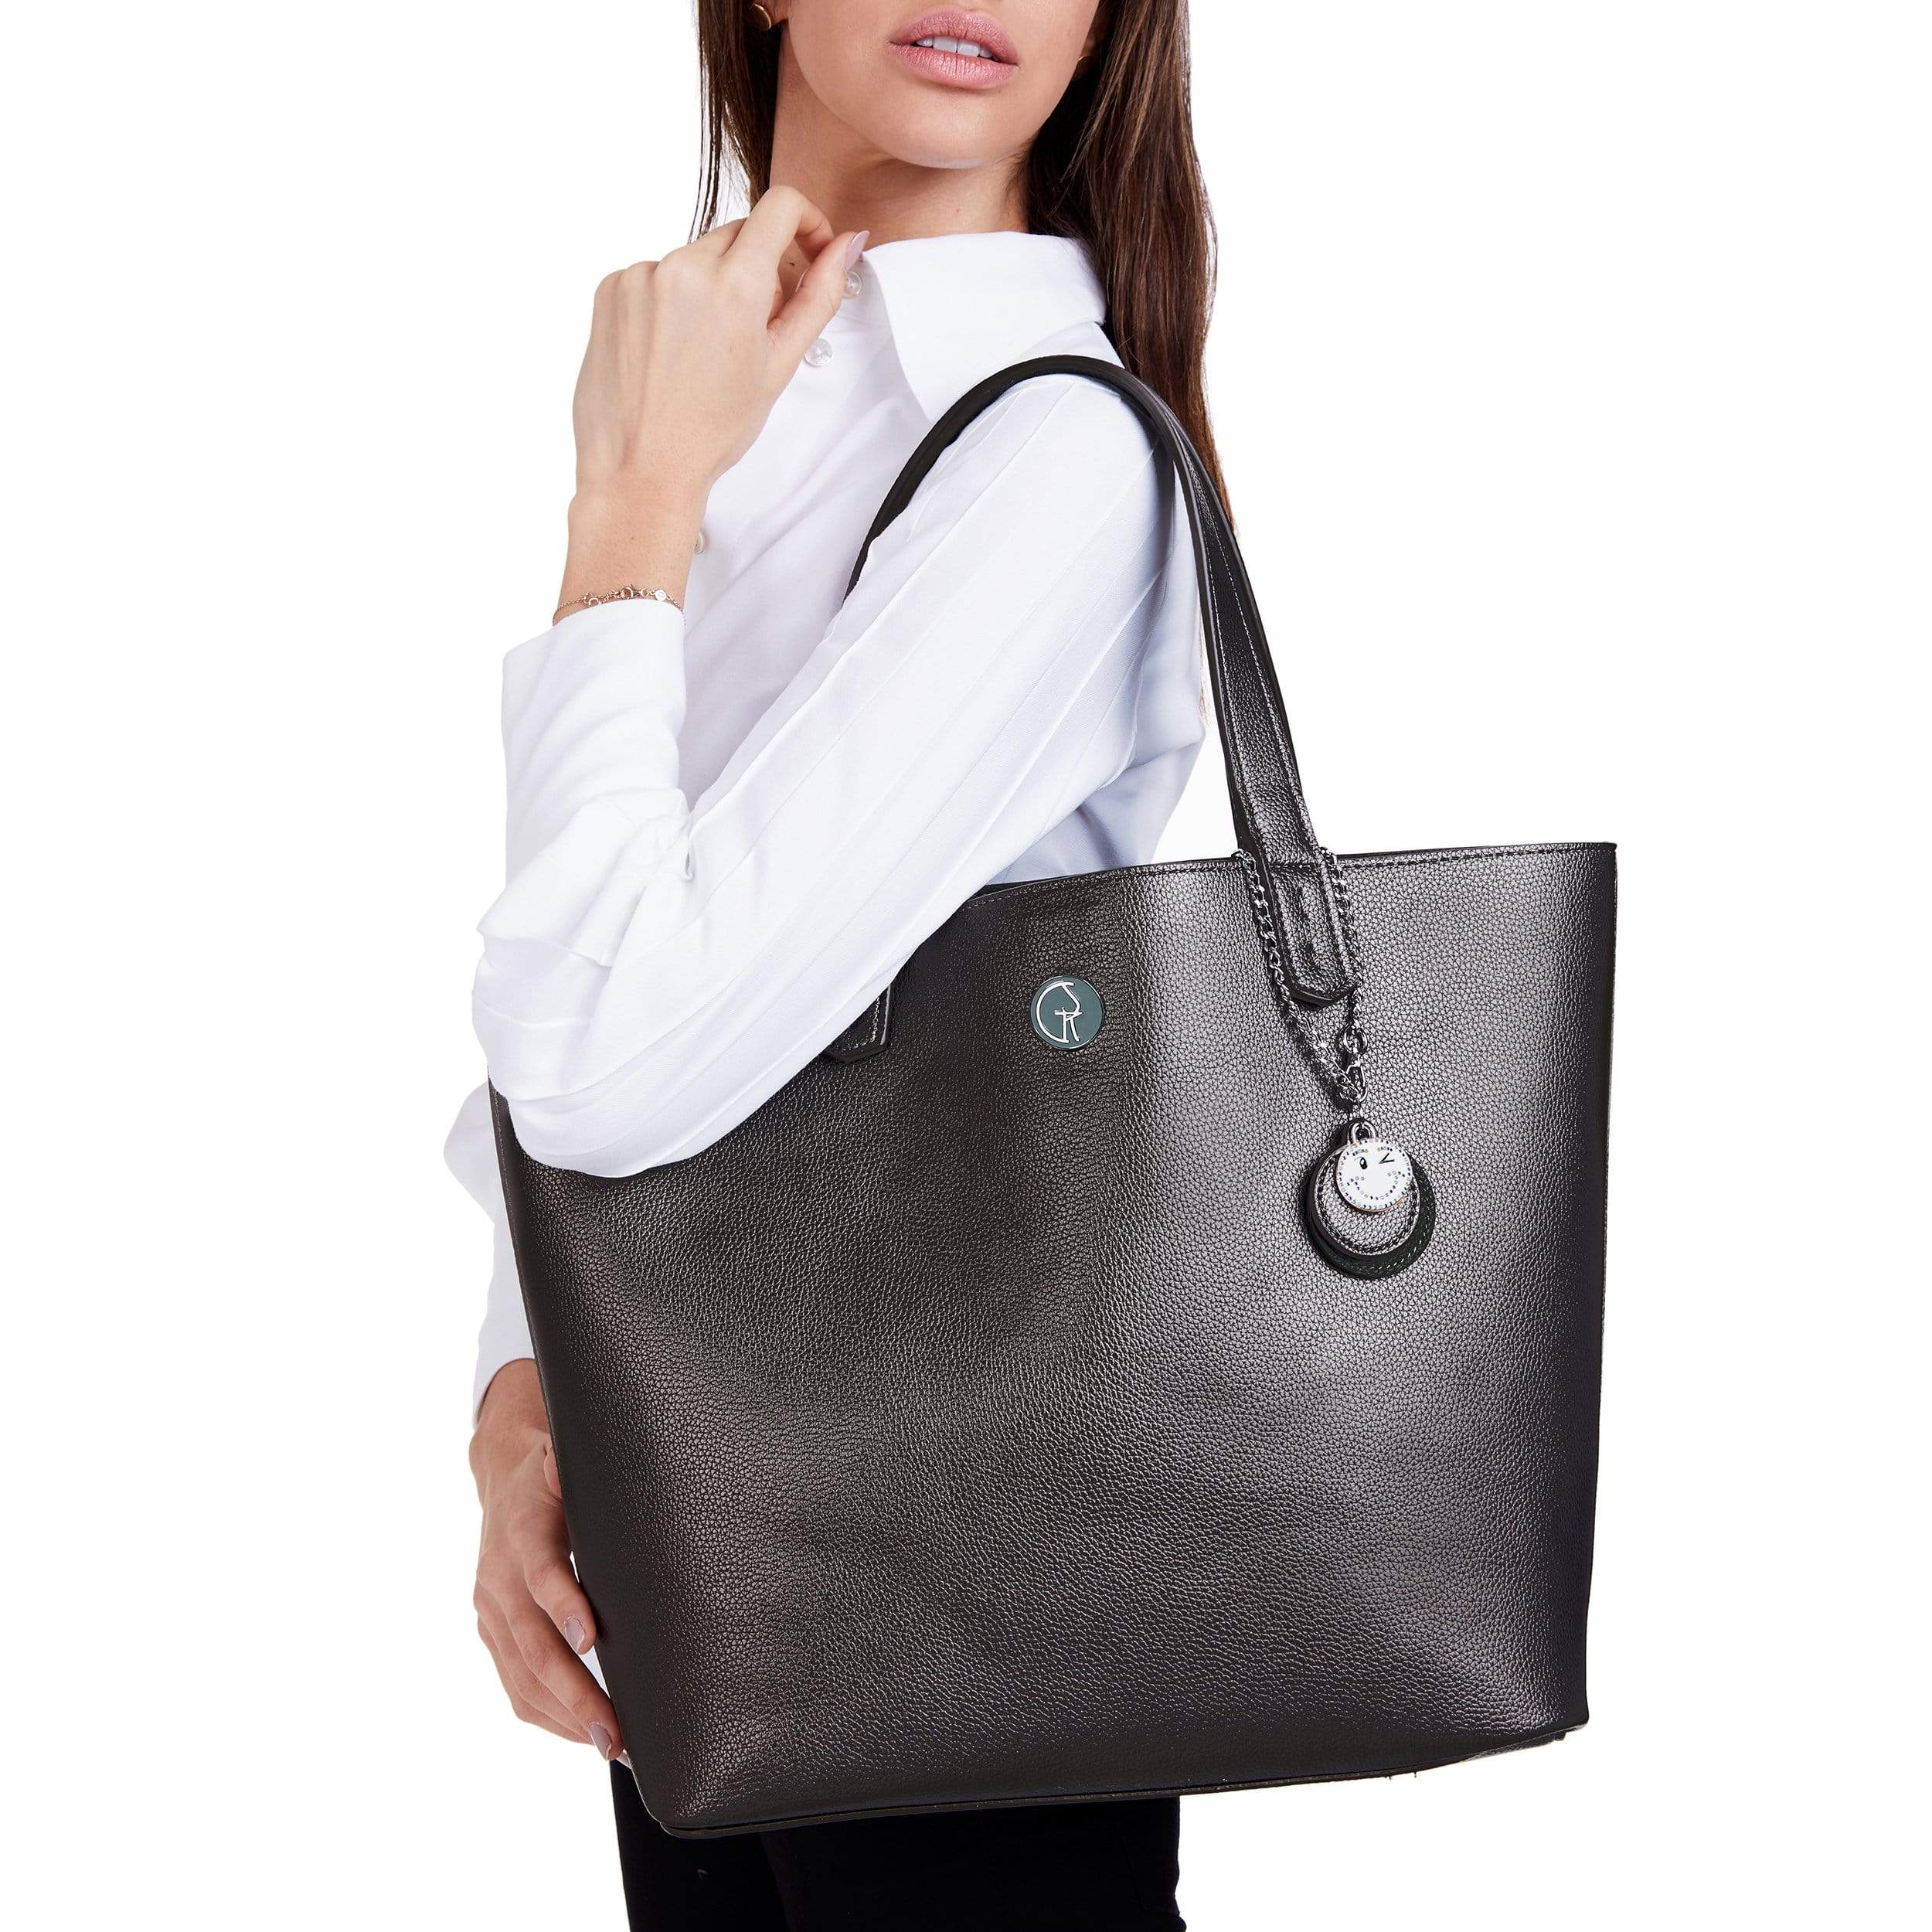 The Morphbag by GSK 3 Vegan Leather Bags in 1 | Forest Green & Metallic